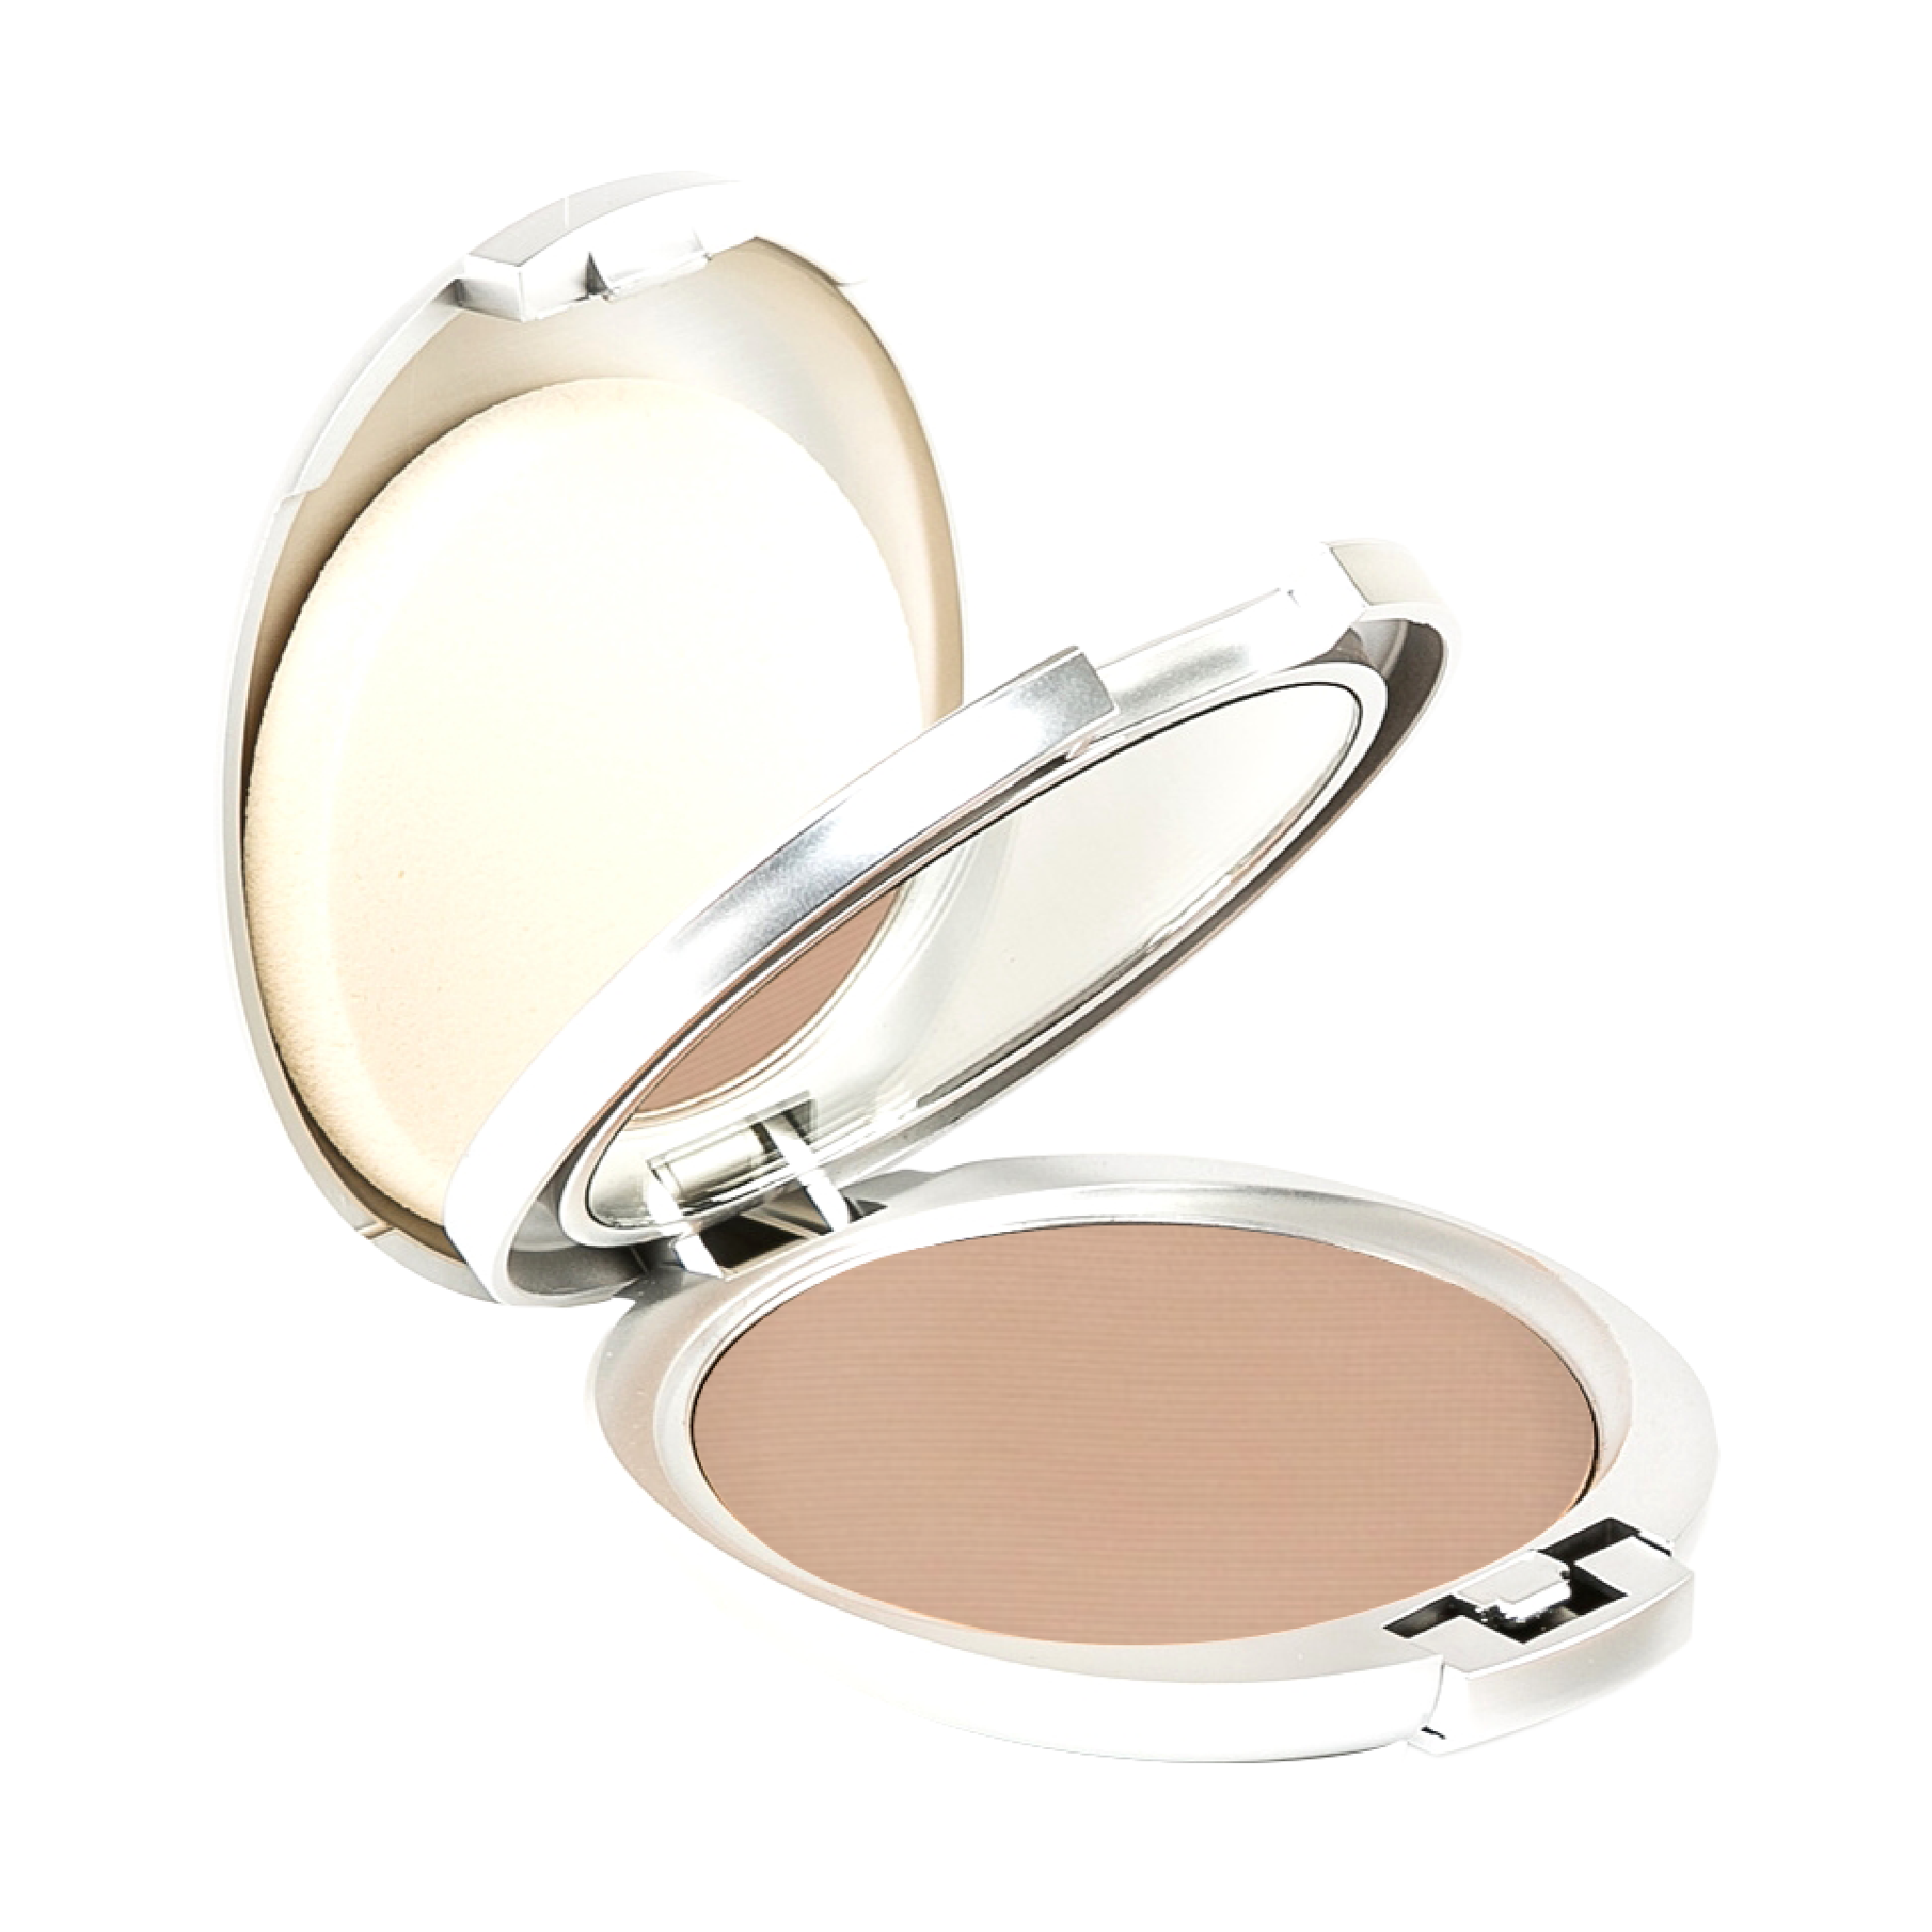 Cose by Tricoci Pressed Mineral Powder Foundation